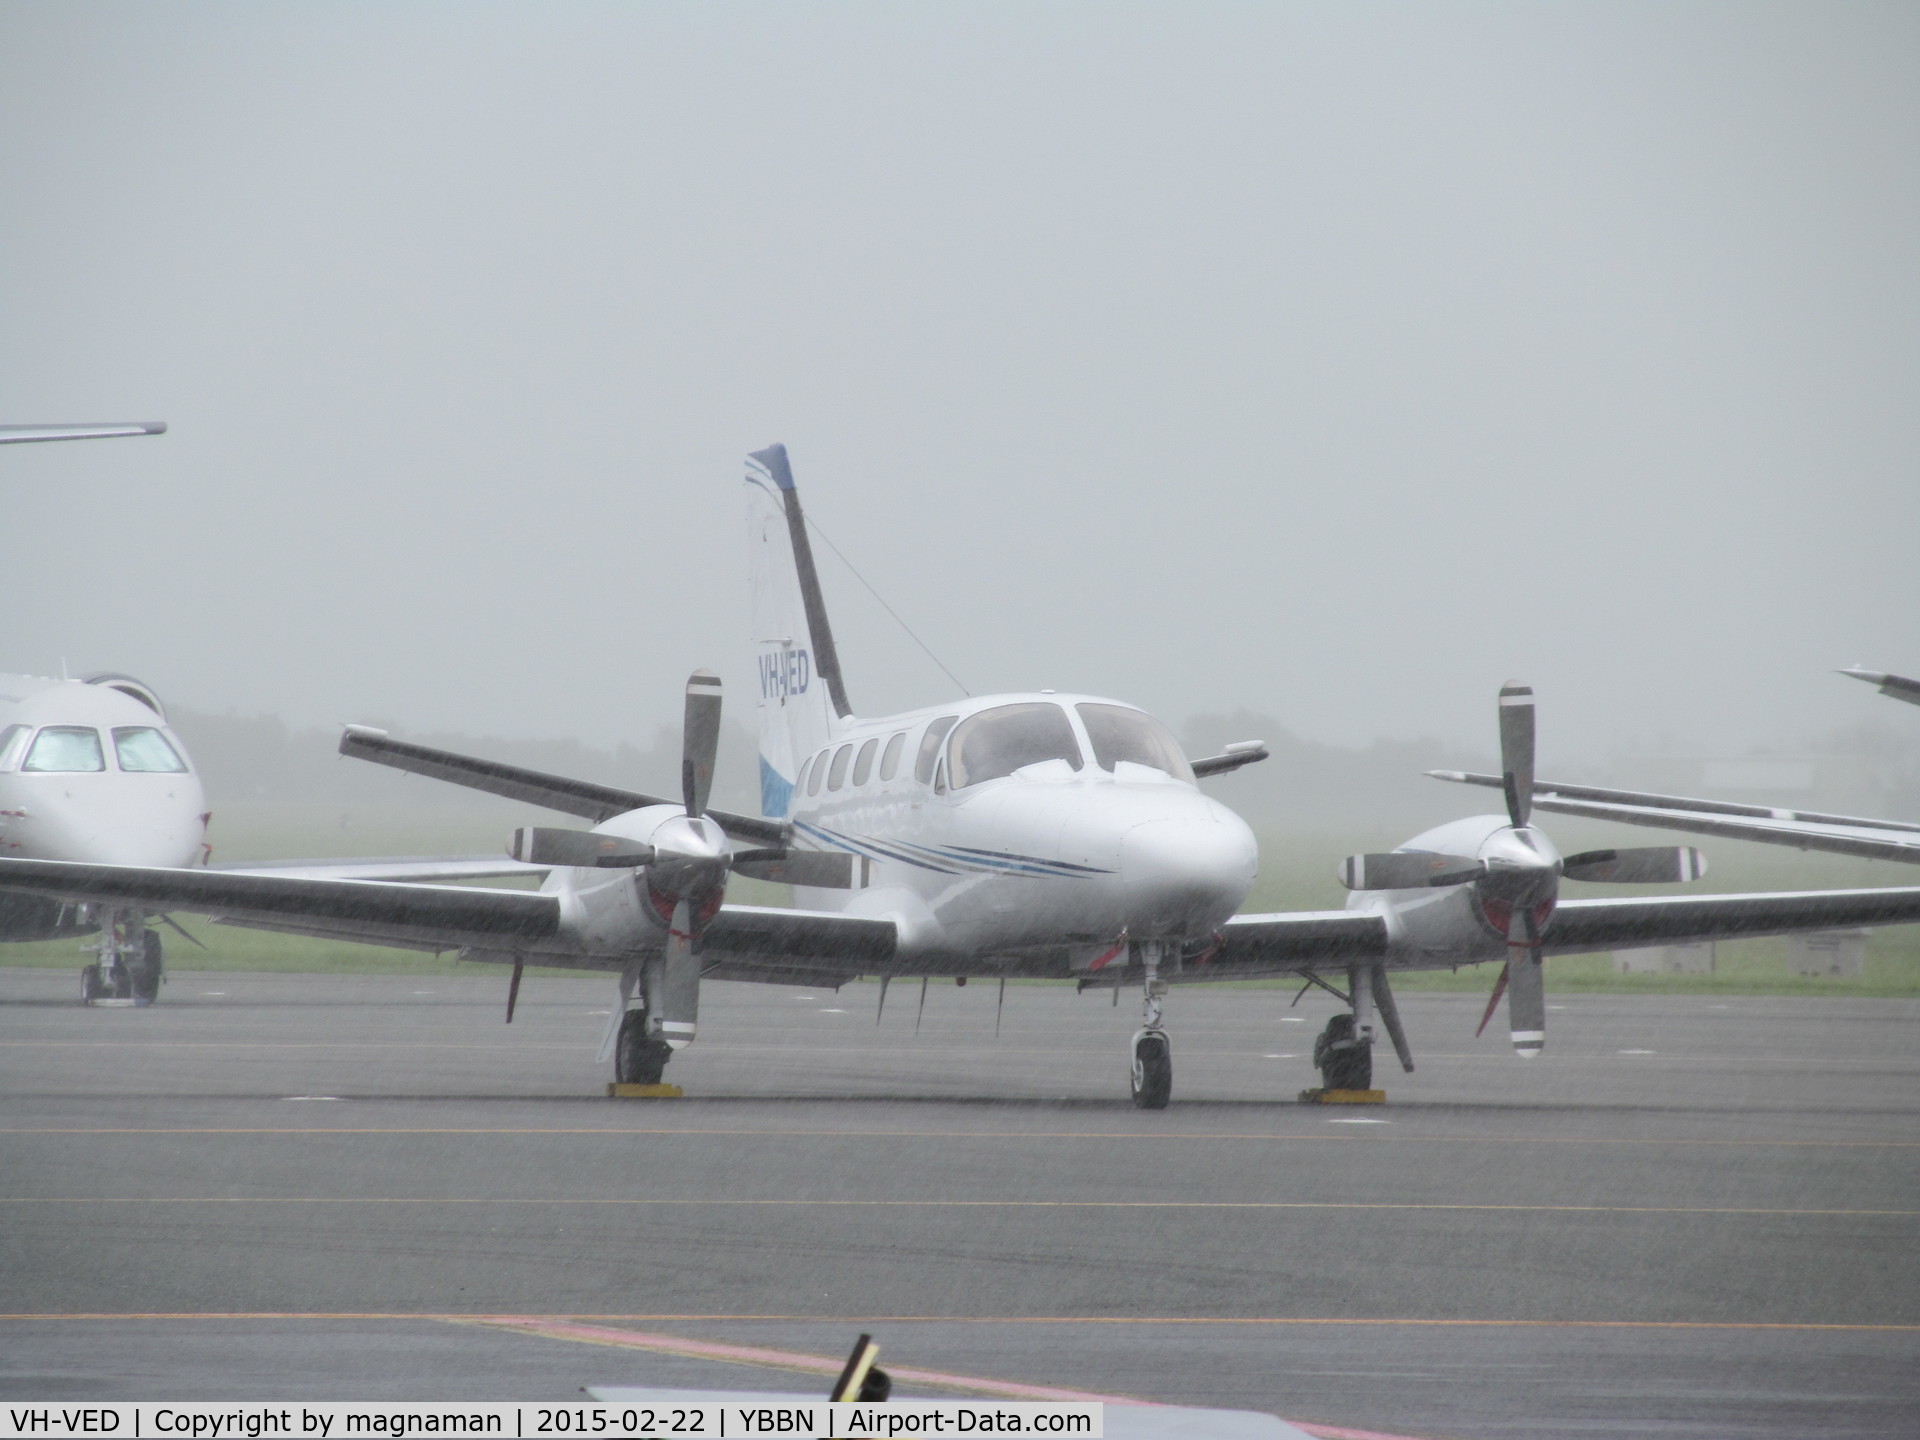 VH-VED, 1981 Cessna 441 Conquest II C/N 441-0272, on GA apron